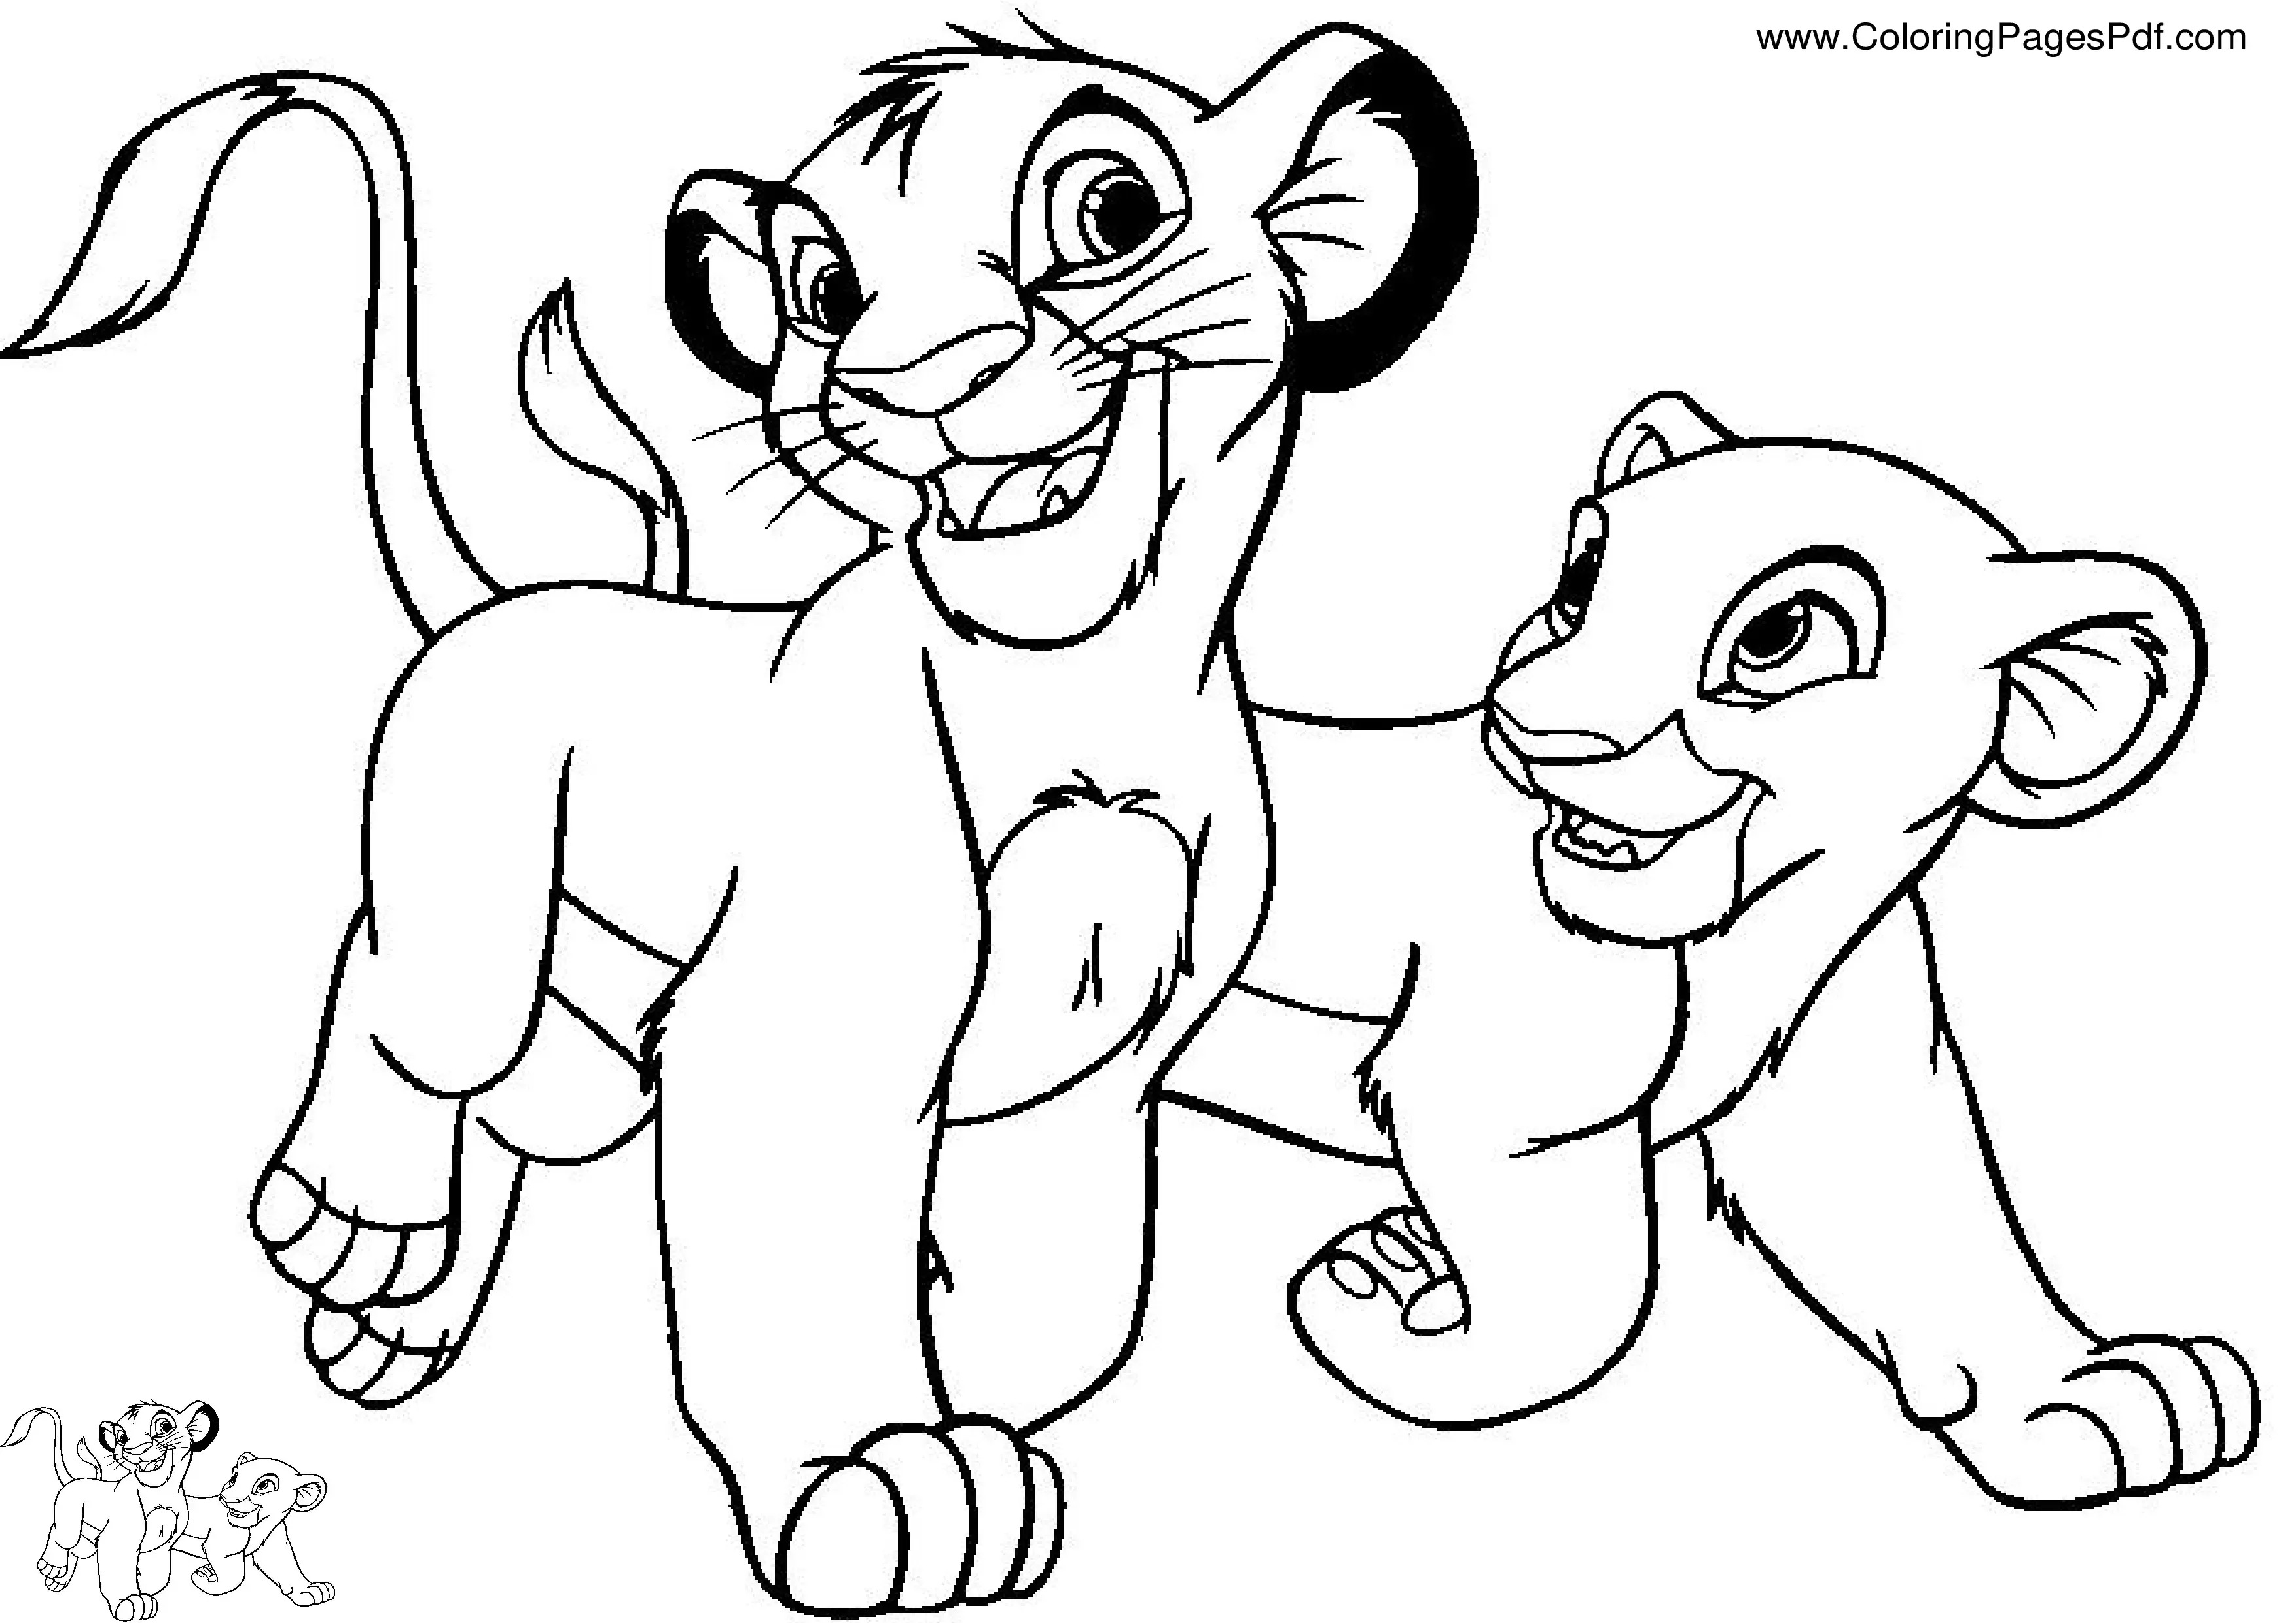 Lion king coloring pages for kids